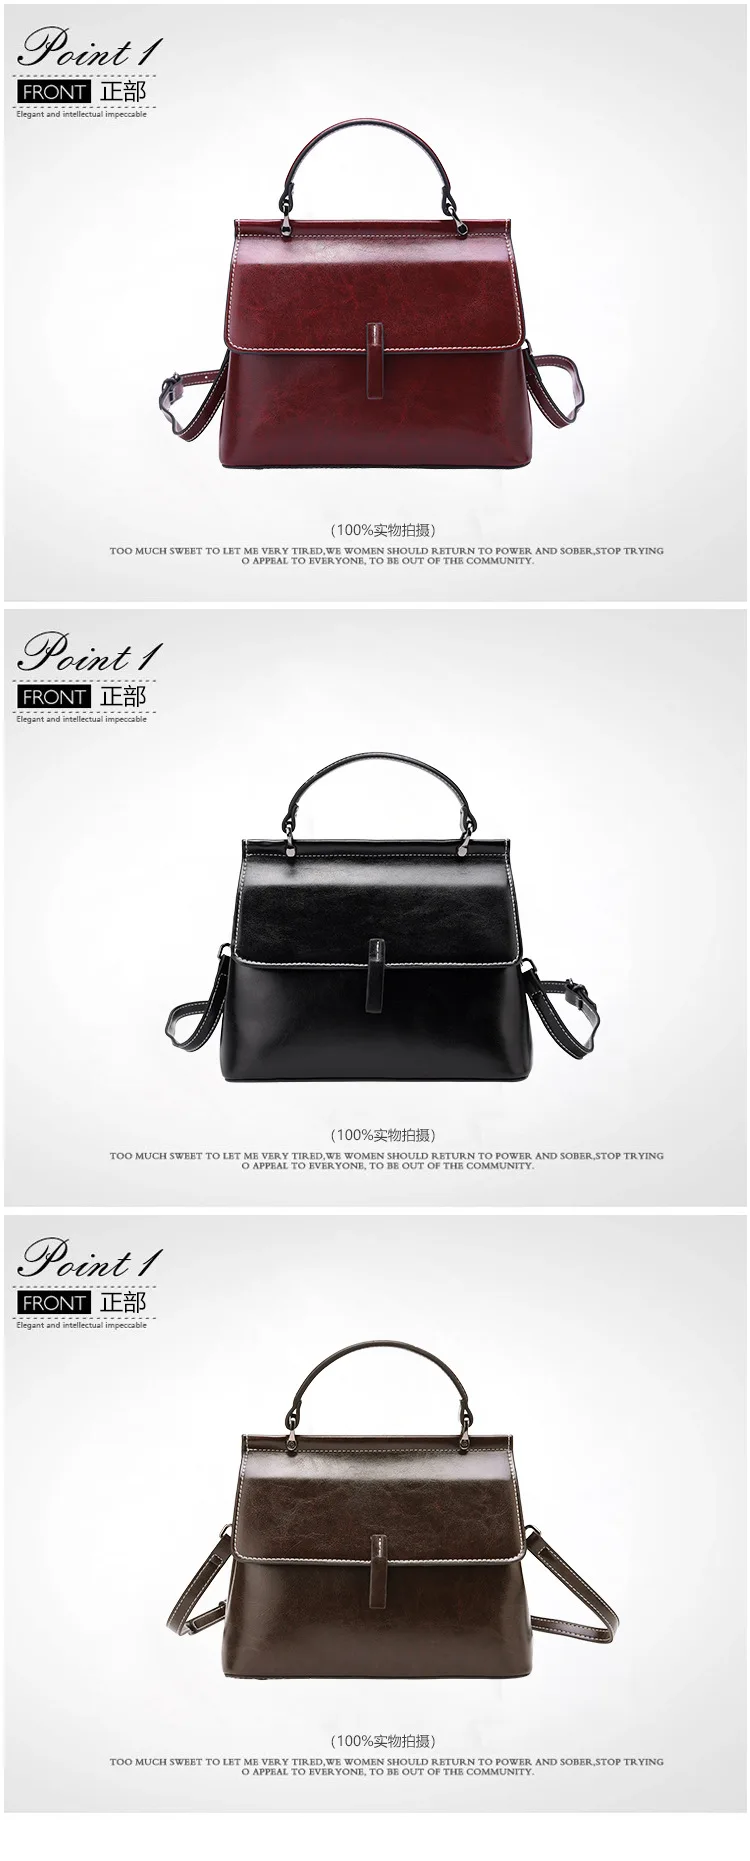 Lady Simple Style Crossbody Shoulder Bag Cow Leather New Women Bag Fashion Genuine Leather Totes Handbags